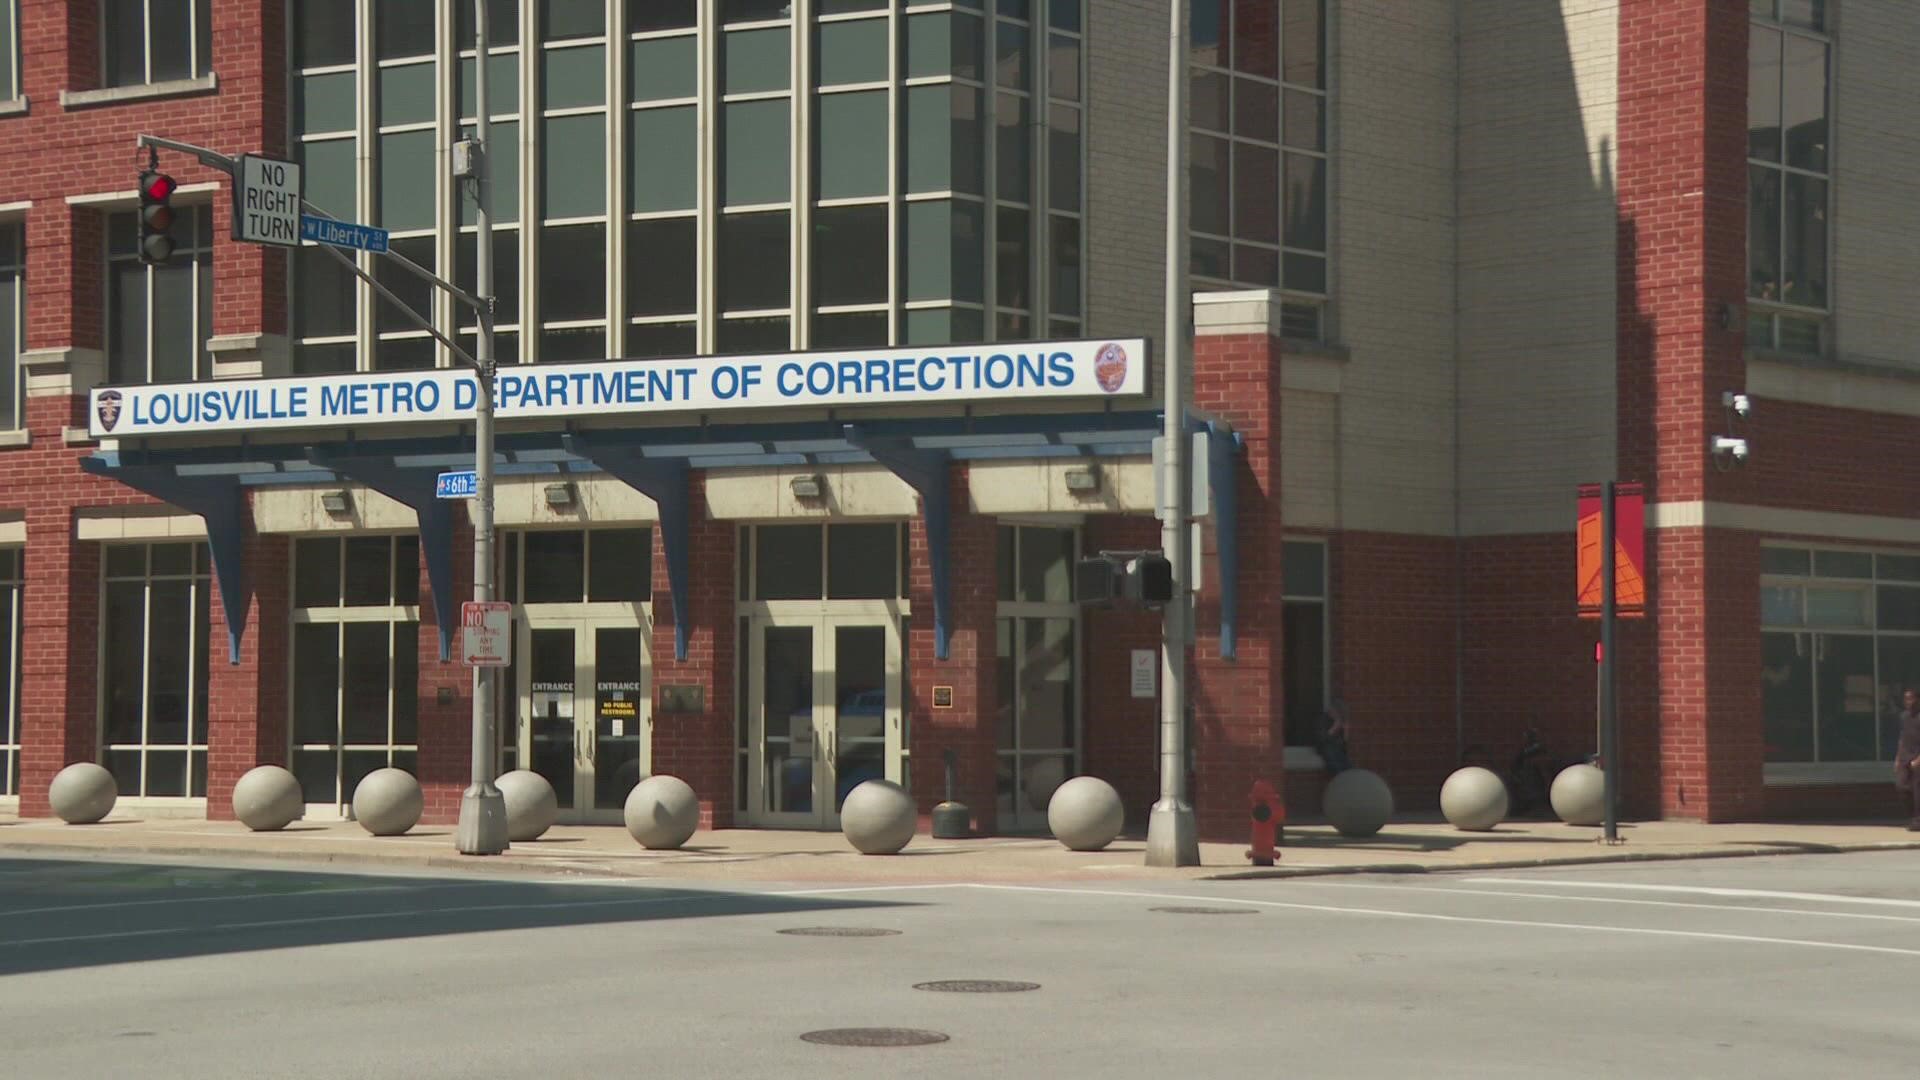 A man died in custody of the Louisville jail over the weekend due to an overdose involving fentanyl.